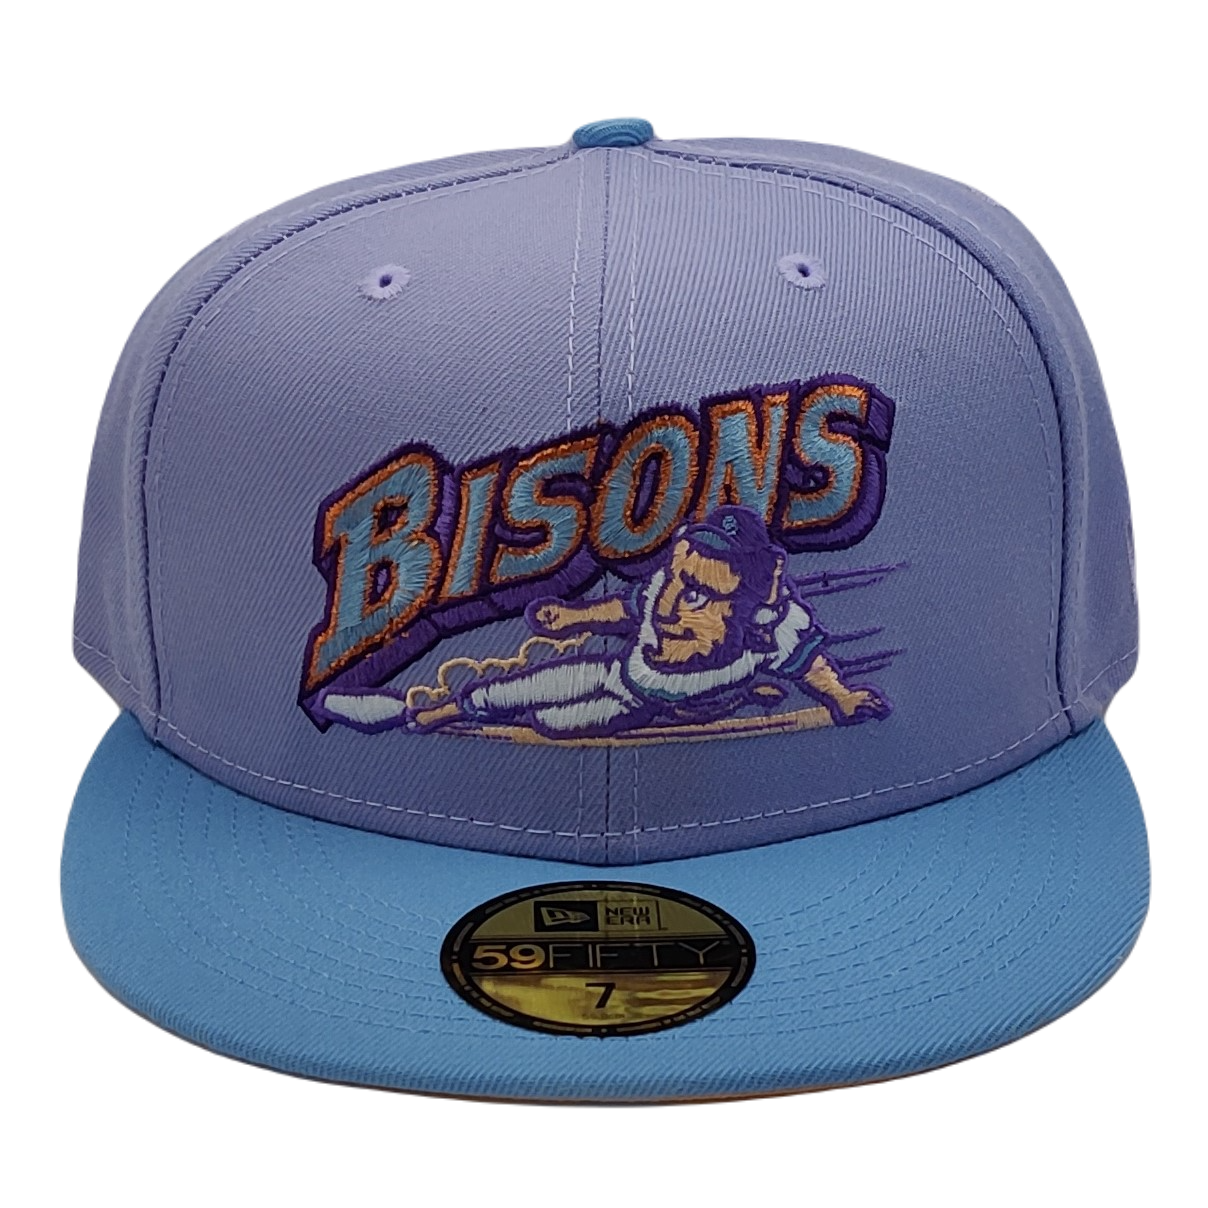 New Era 59Fifty Buffalo Bisons Lavender and Peach Fitted Hat